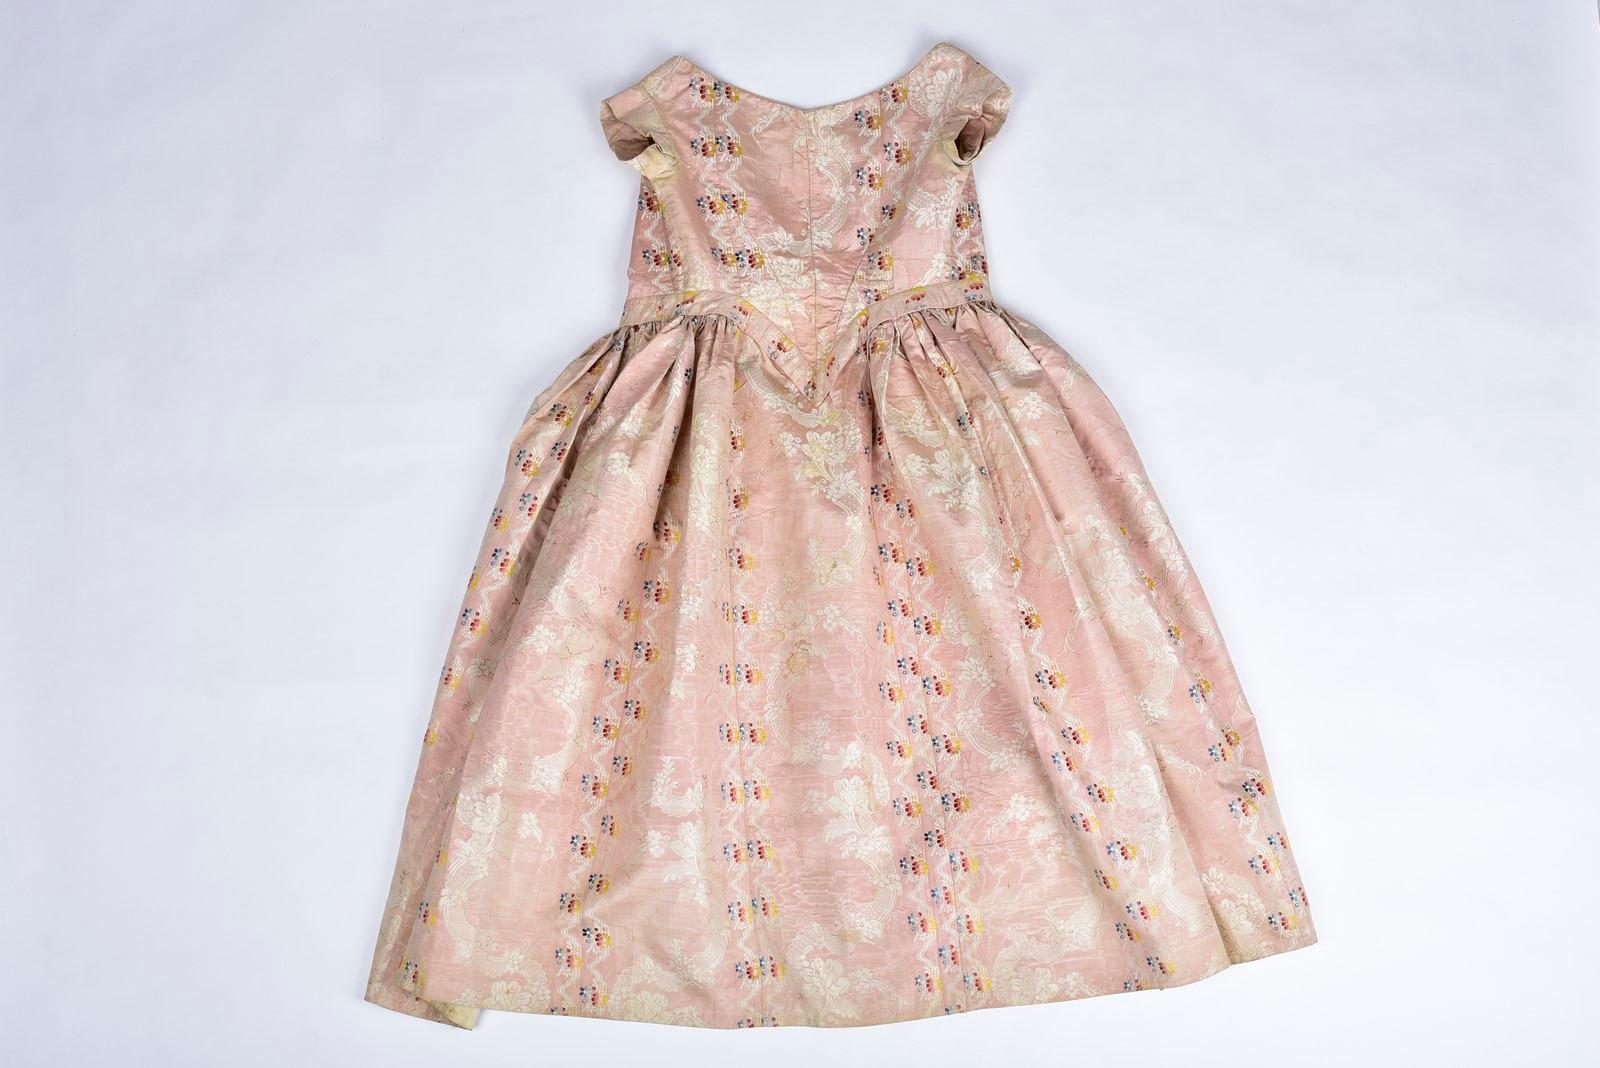 Circa 1860
France or Southern Europe

Beautiful summer crinoline ball gown in pale pink moiré silk lampas with brocaded floral garlands, probably made earlier than the large crinoline dress. The one-piece bodice is whalebone, pointed at the front